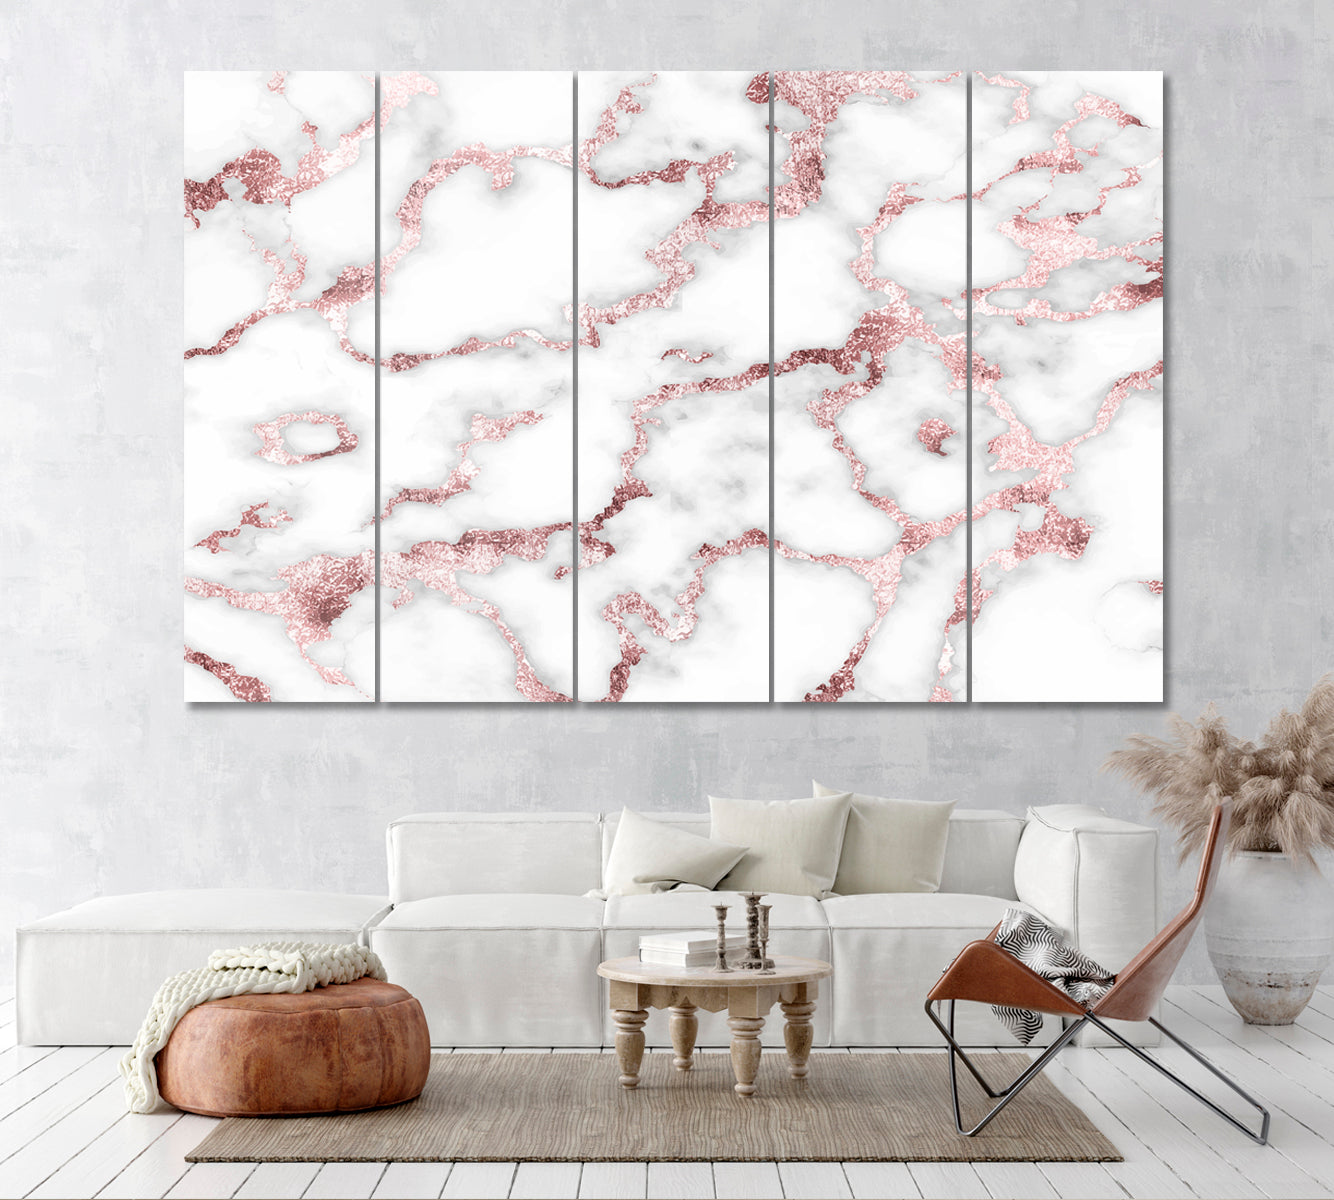 Elegant White Marble with Rose Gold Veins Canvas Print ArtLexy 5 Panels 36"x24" inches 